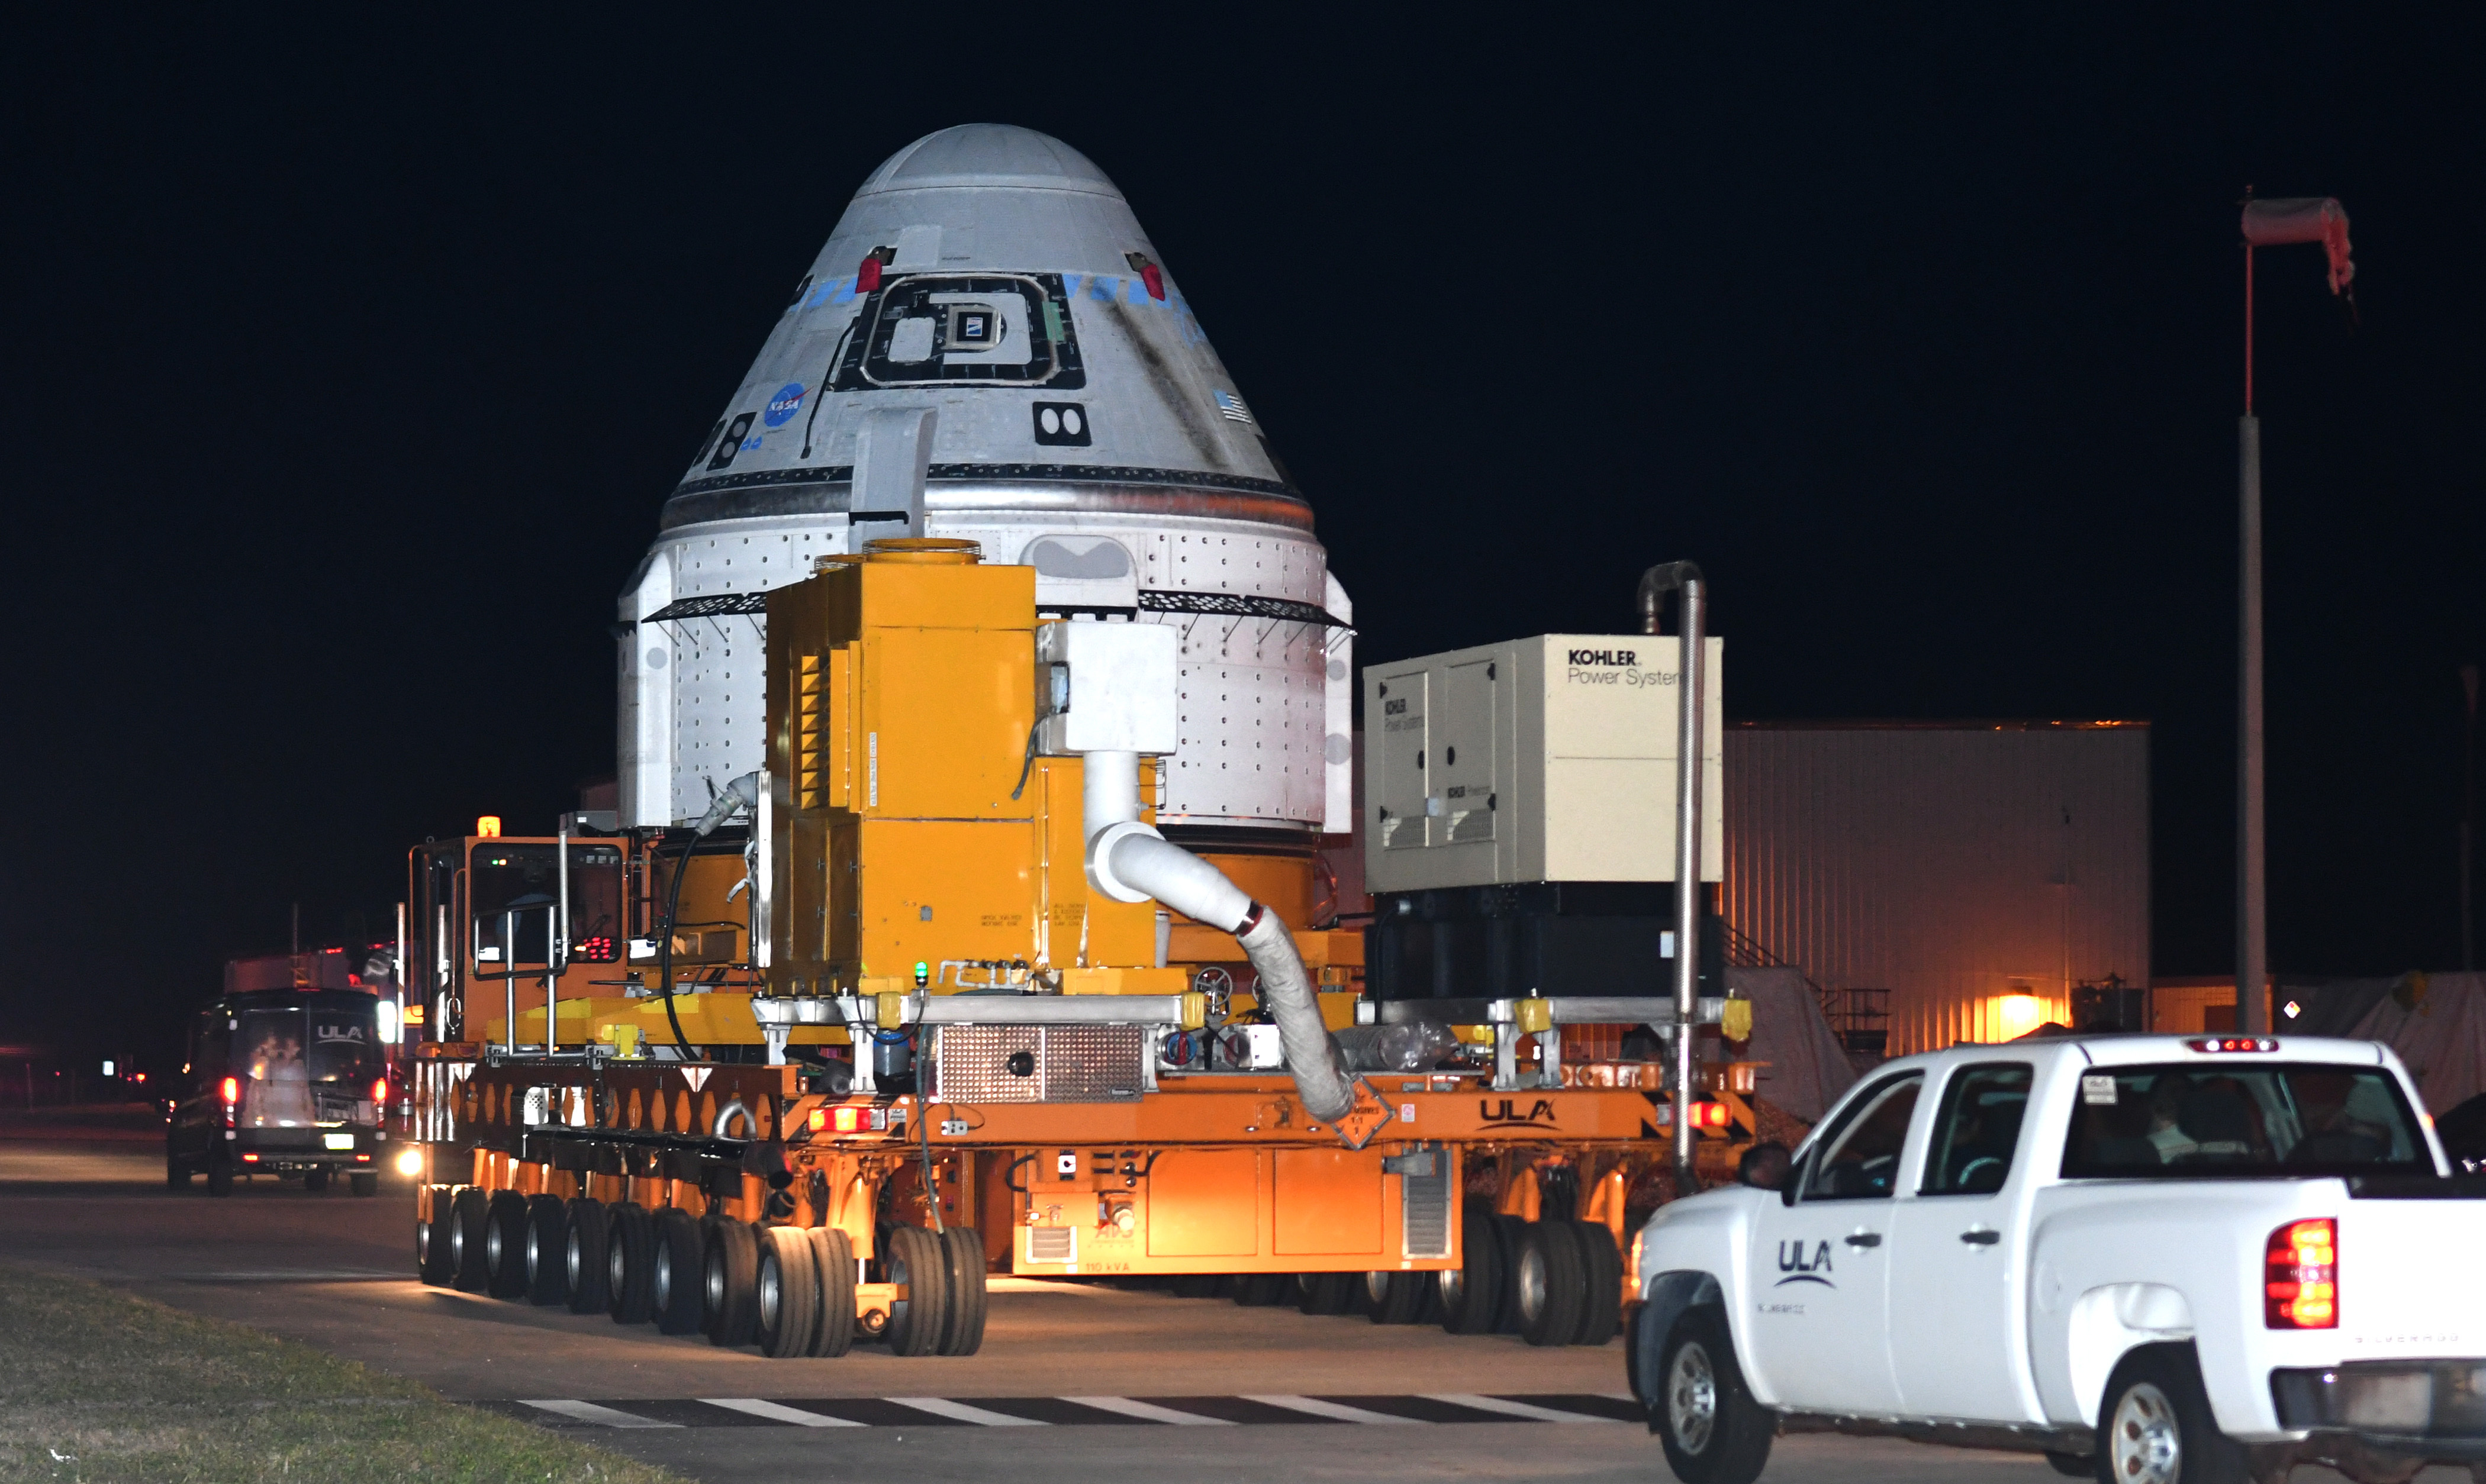 <p>Boeing's CST-100 Starliner spacecraft was rolled out of the Commercial Crew and Cargo Processing Facility at the Kennedy Space Center to be transported to pad 41 at Cape Canaveral Space Force Station in Cape Canaveral, Florida, on April 16, 2024. </p><p>Starliner is scheduled for its first crewed launch to the International Space Station on a ULA Atlas V rocket with NASA astronauts Suni Williams and Butch Wilmore on May 6, 2024.</p><p>MORE: <a href="https://www.wonderwall.com/celebrity/photos/the-best-pictures-of-nasas-secret-new-x-59-plane-828970.gallery">NASA unveils new supersonic aircraft: All the best pictures</a></p>